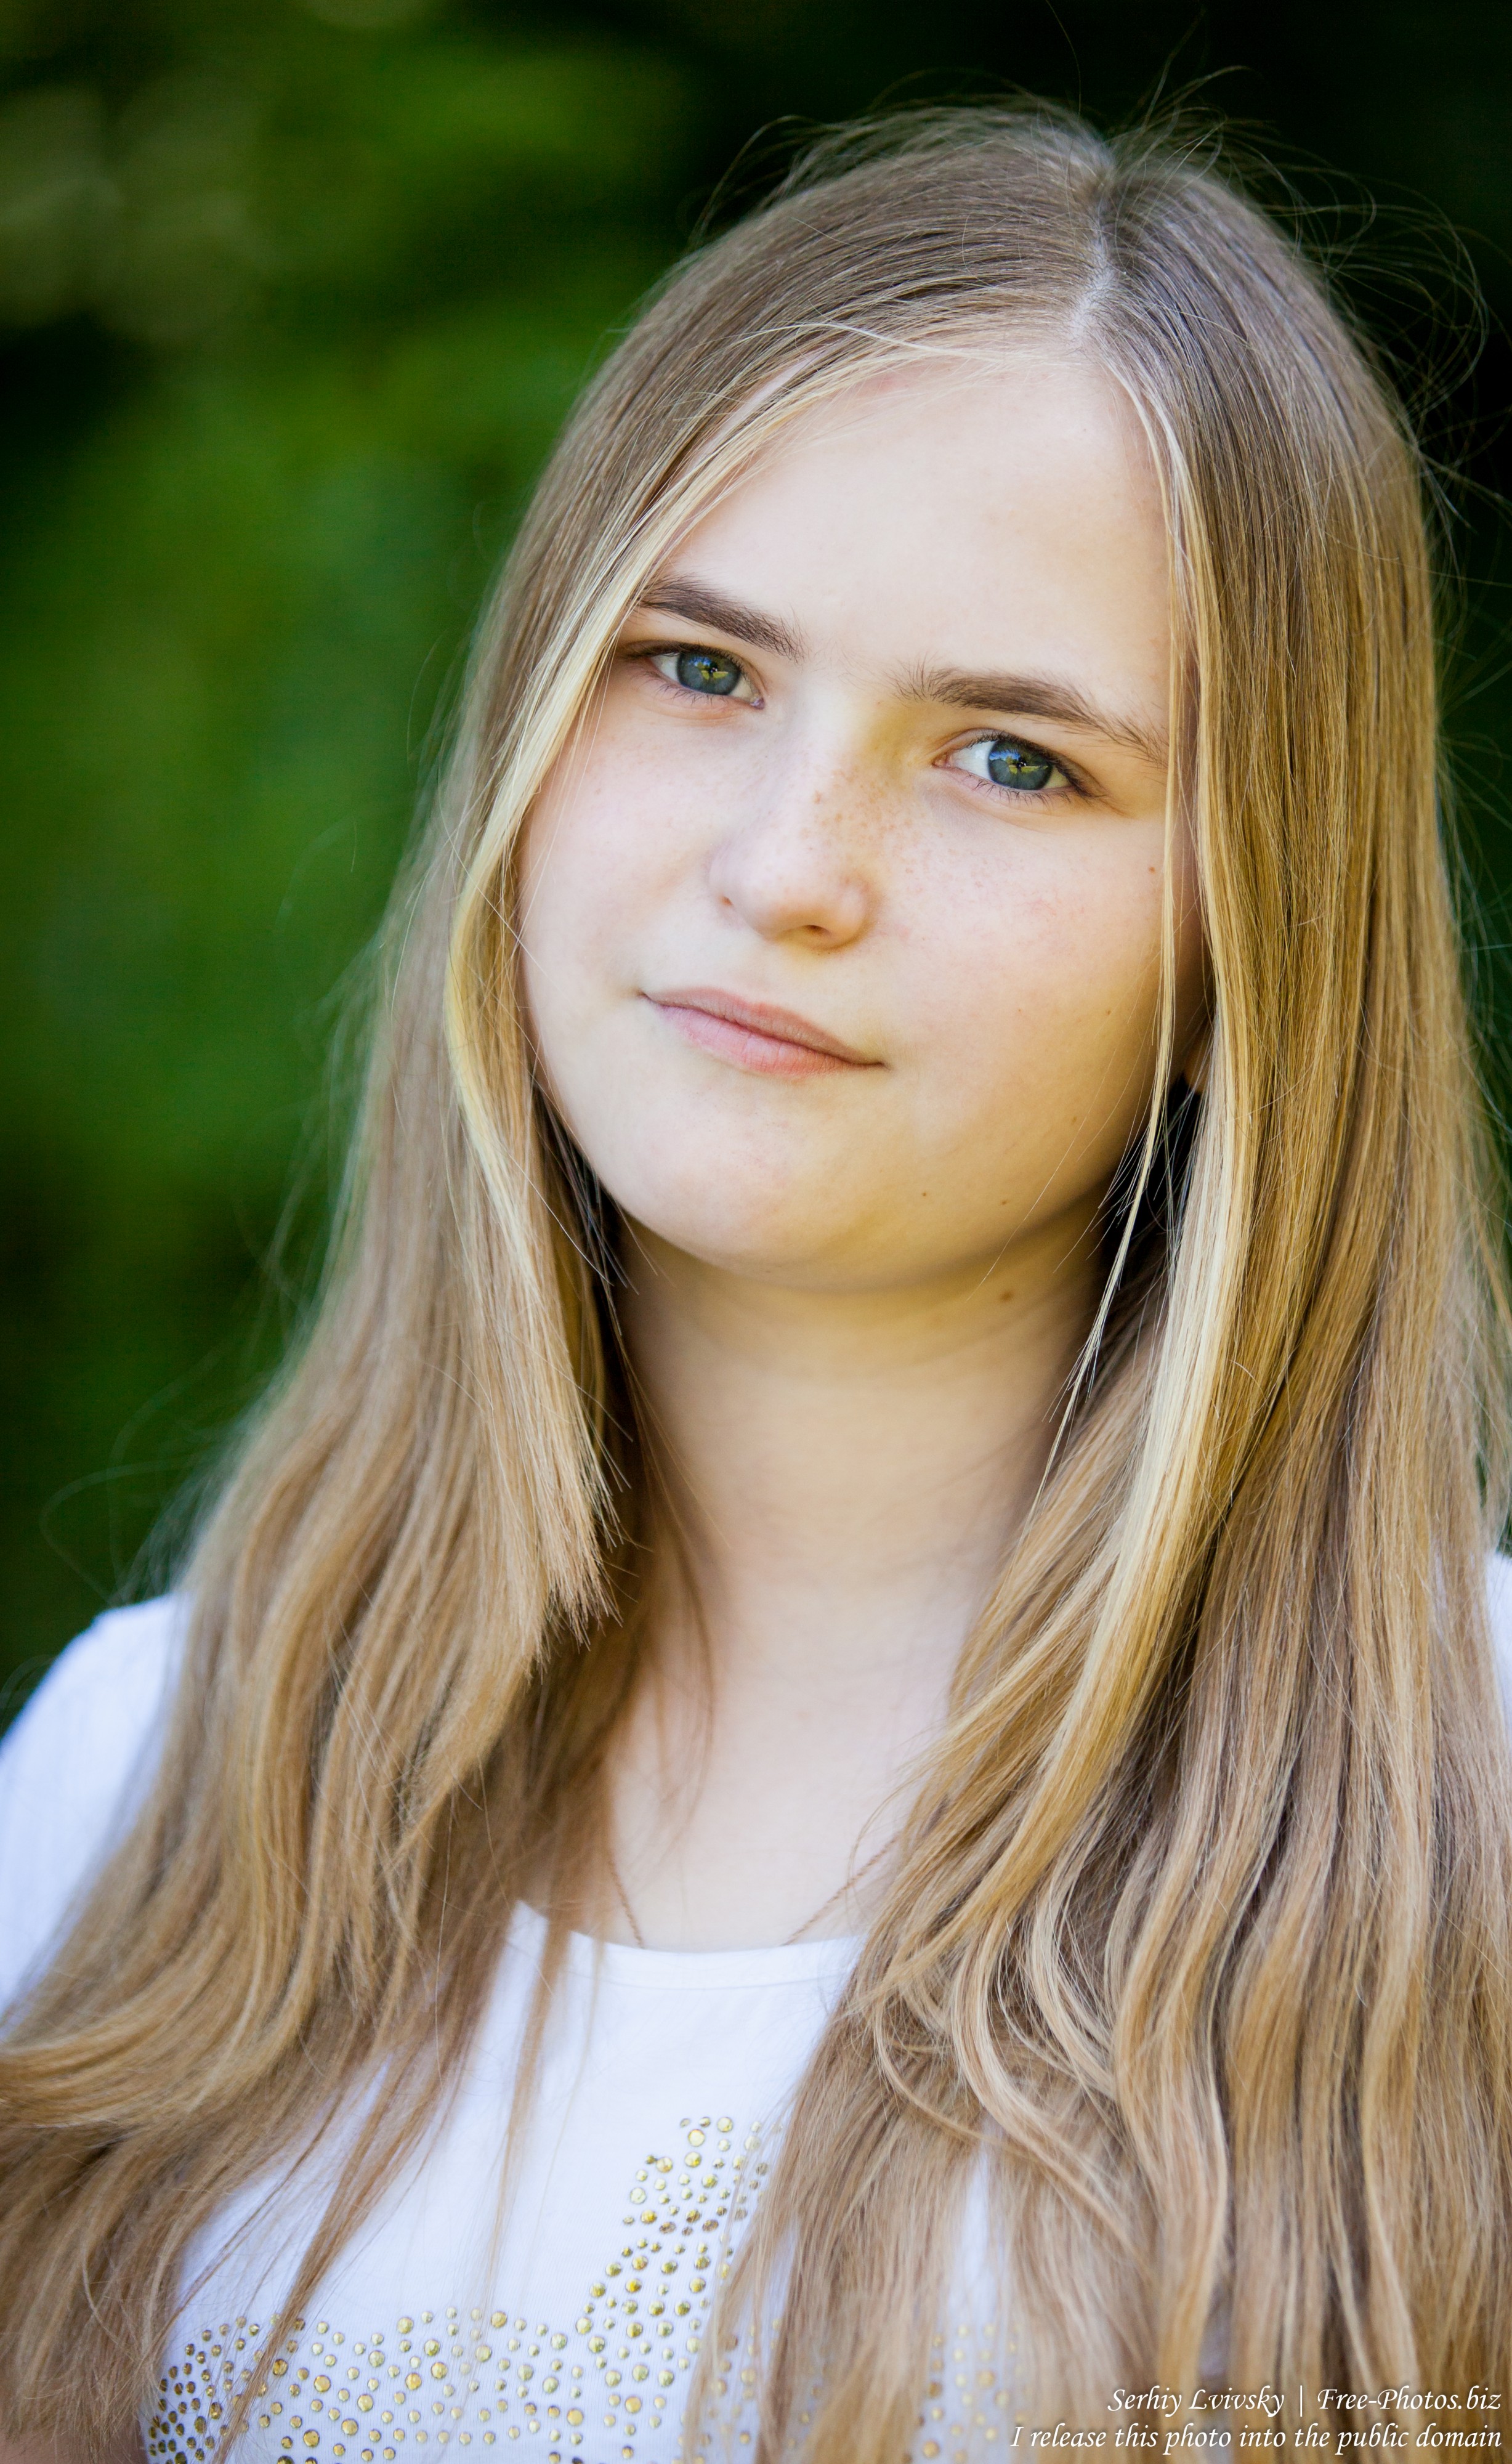 a 14-year old fair-haired girl photographed in June 2015, picture 6